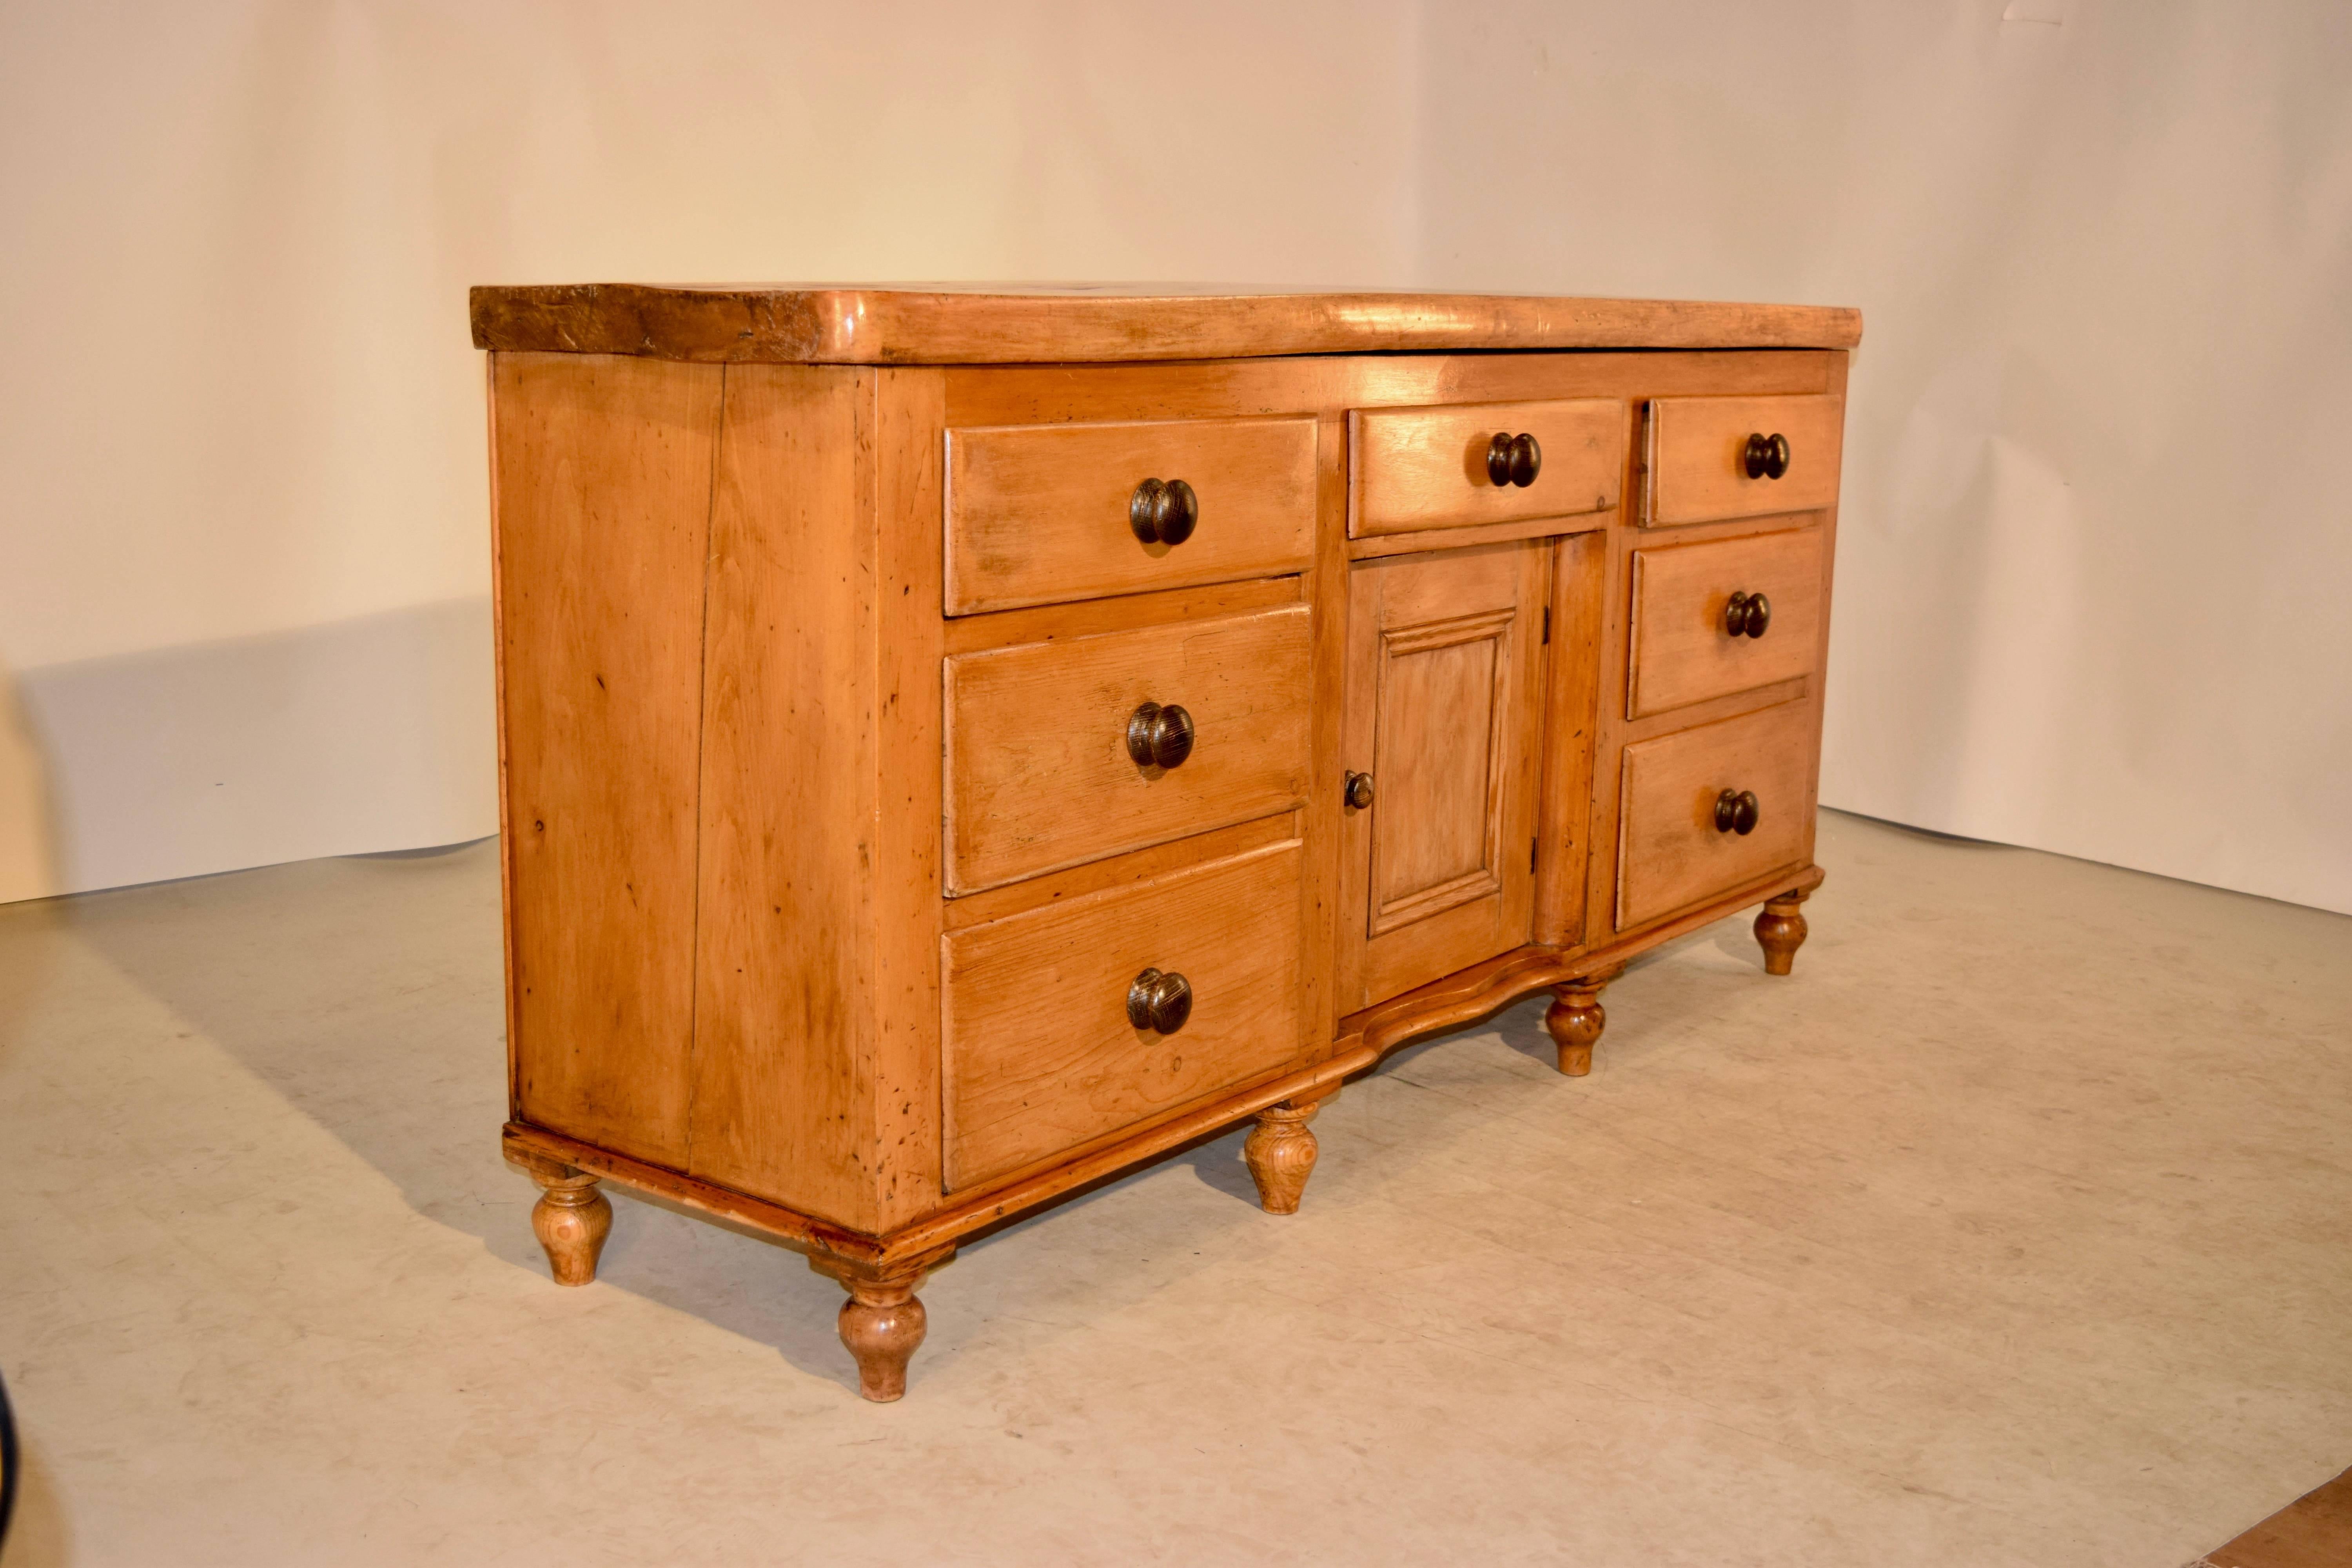 19th century English dresser with a thick single plank top made from sycamore, following down to a simple case with two banks of drawers flanking a single central drawer over a central door. The bottom is scalloped and the piece is resting upon